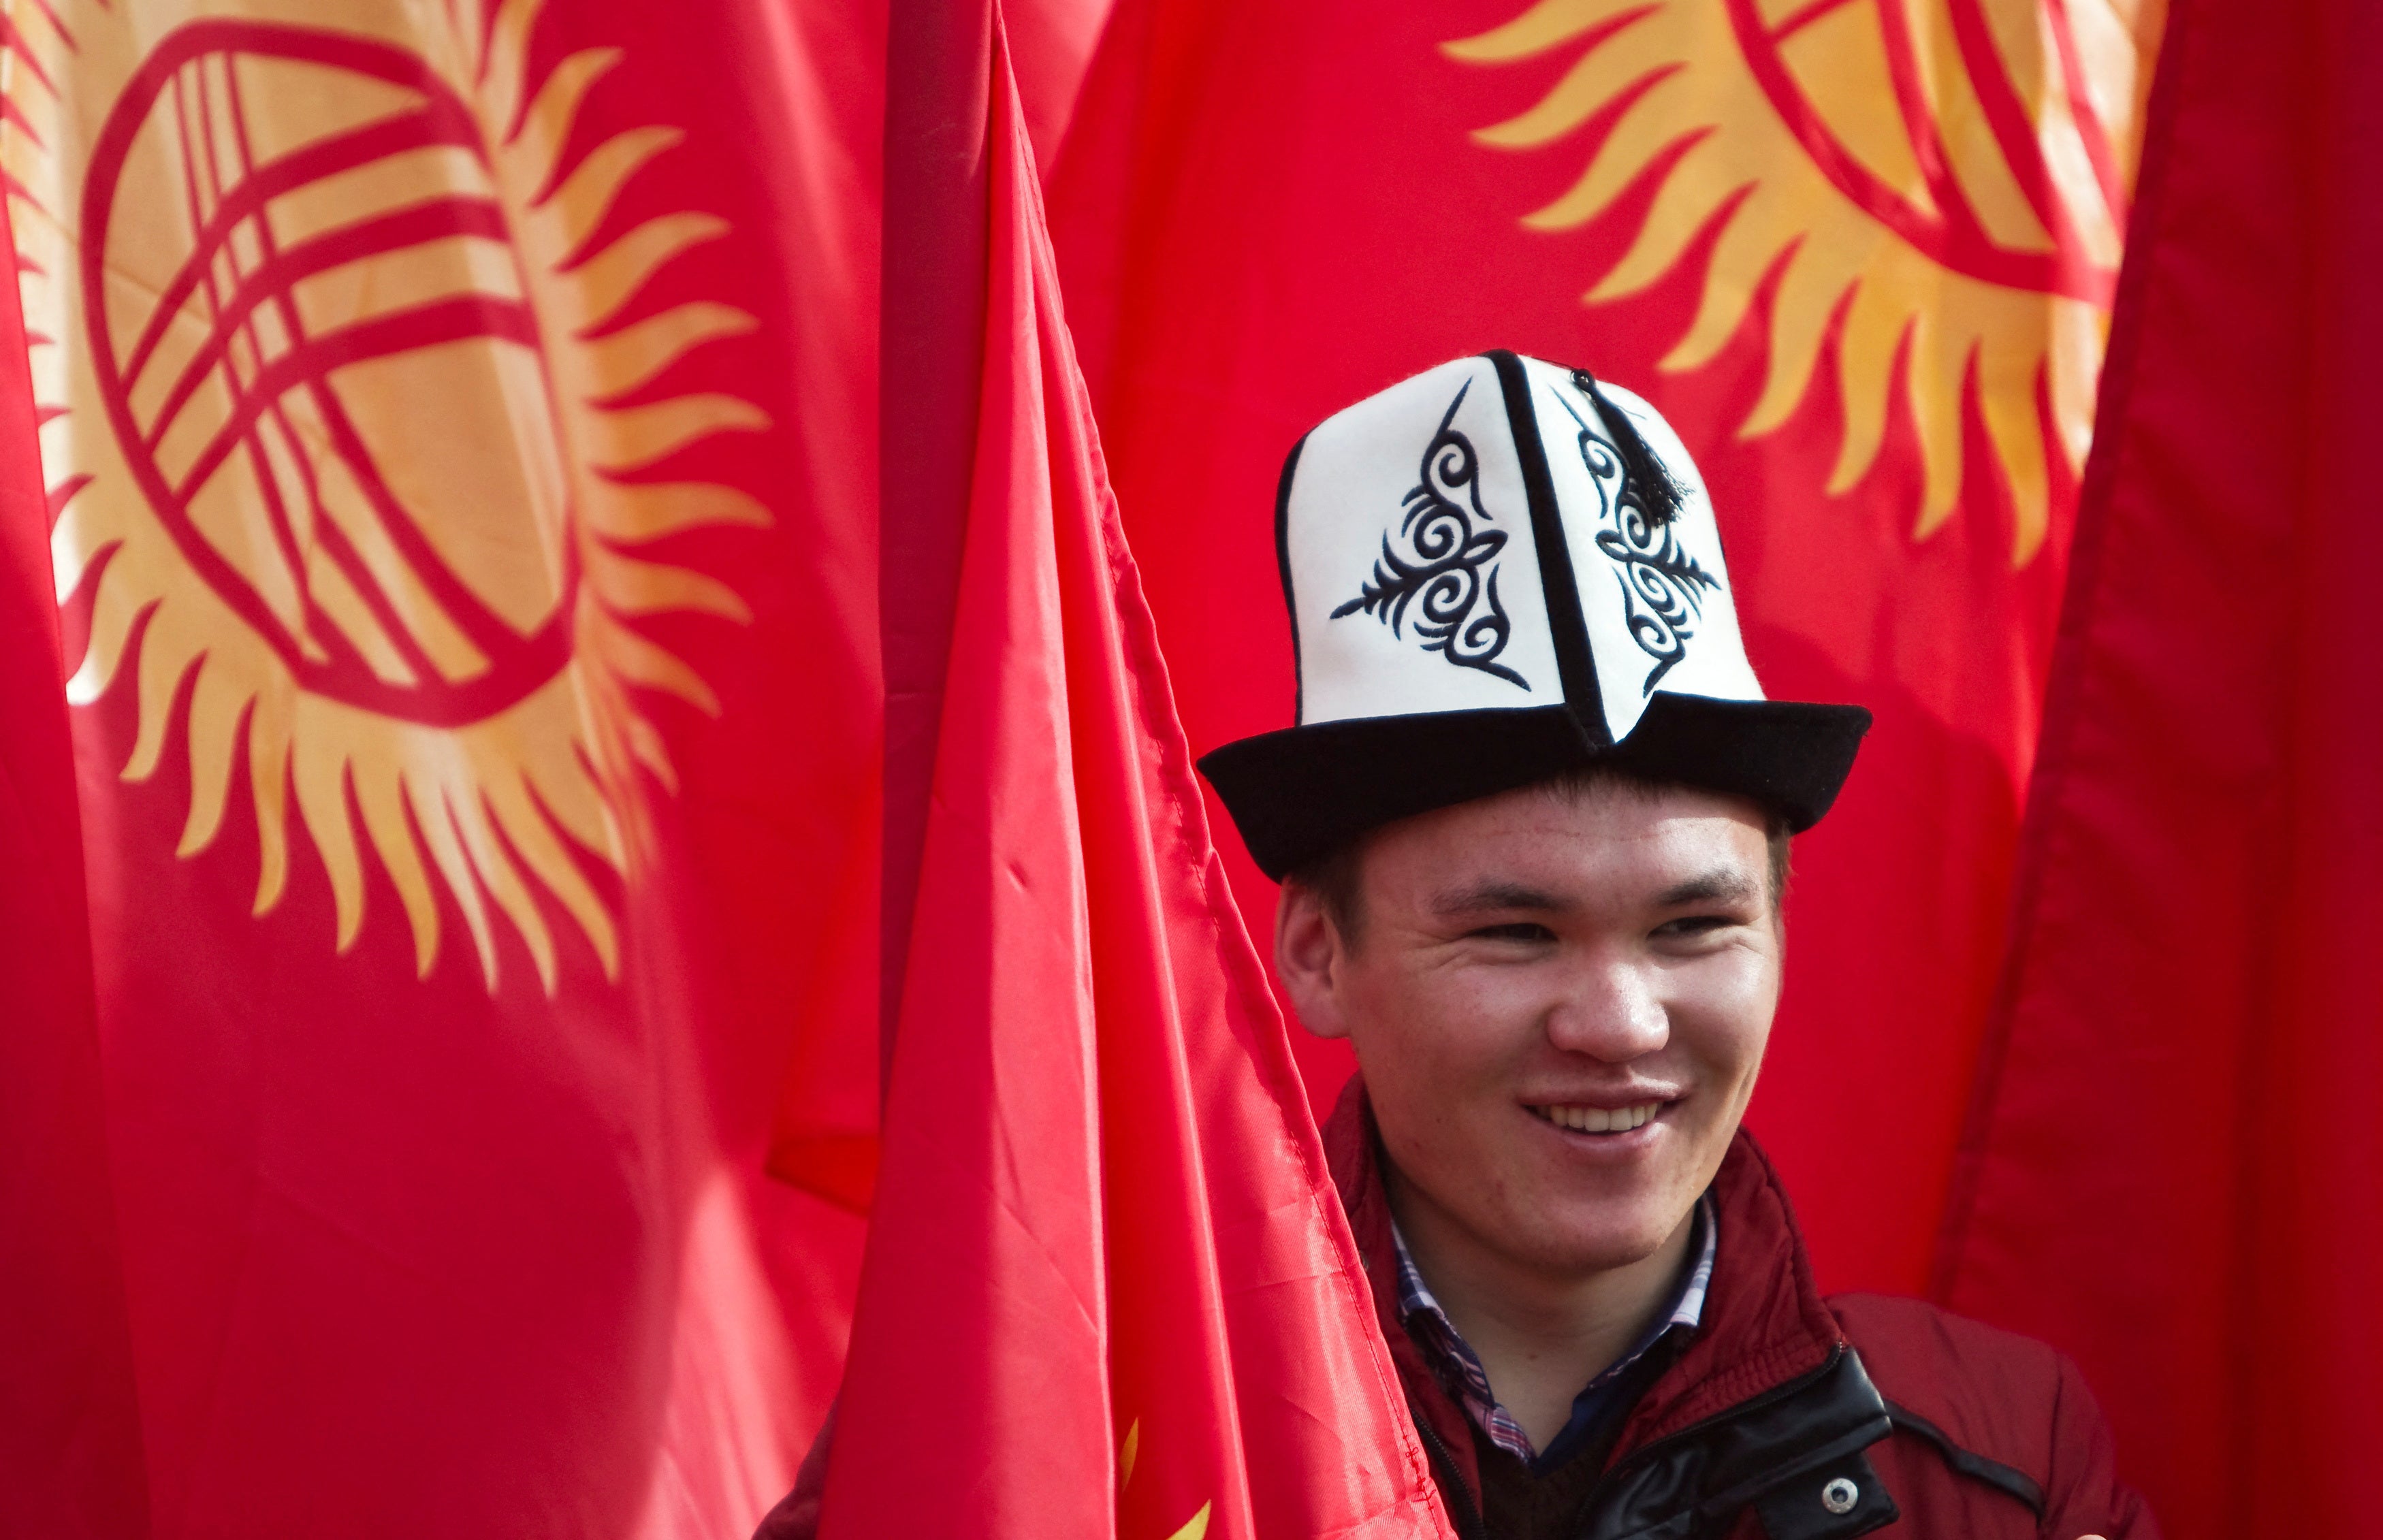 A man wearing a Kyrgyz national hat poses with national flags before a rally marking the Day of Flag and the Day of Kolpak in Bishkek, Kyrgyzstan